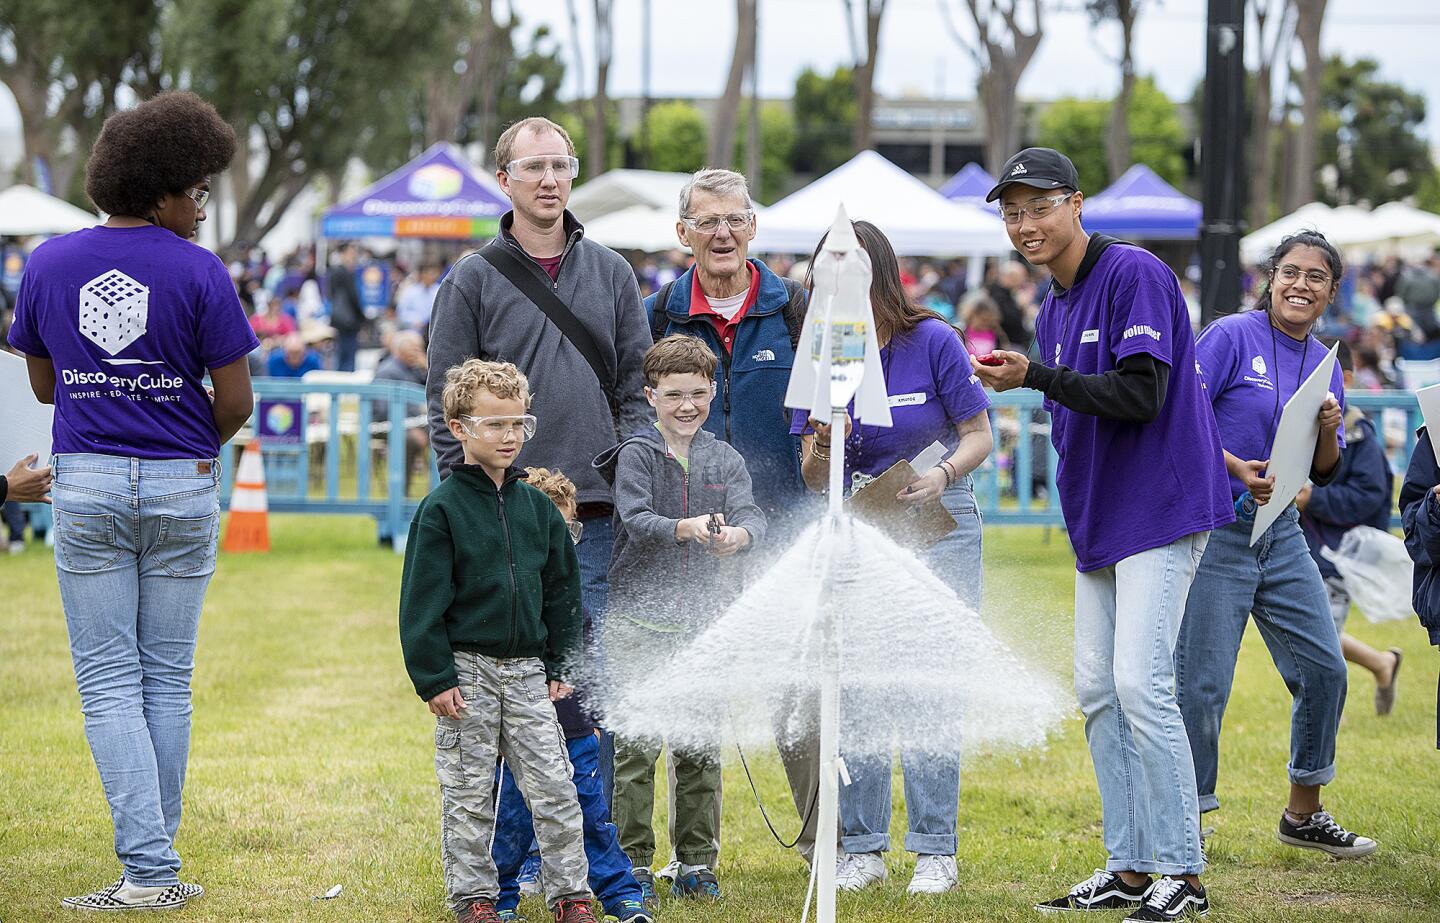 Andrew Jamison, 9, launches the bottle rocket he built as his brothers Quinn, 7, and Cranmore, 4, and father Eliot and grandfather Dick Williams watch during the annual Rocket Launch at Boeing Co. in Huntington Beach on Saturday. The event was co-presented by Discovery Cube Orange County.